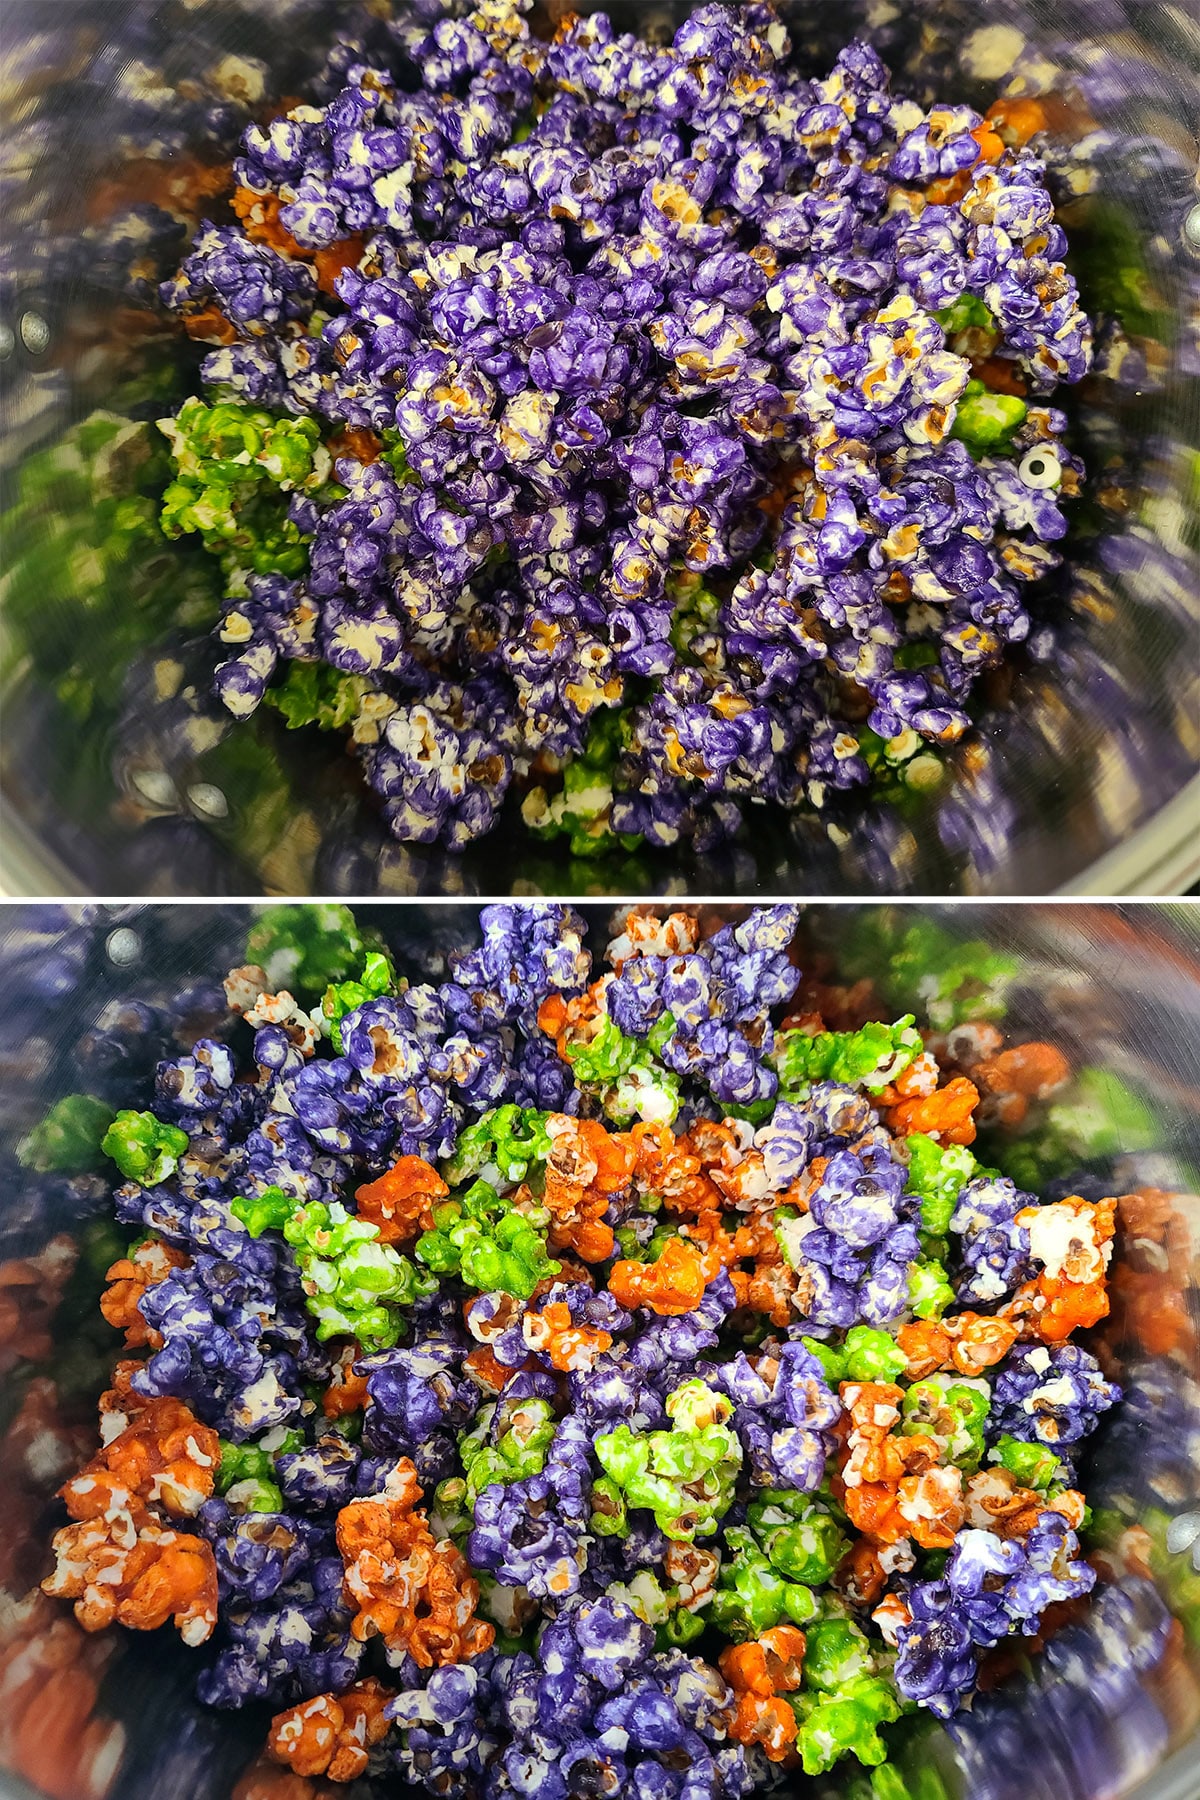 A 2 part image showing a large pot of the glazed popcorns, before and after being mixed together.